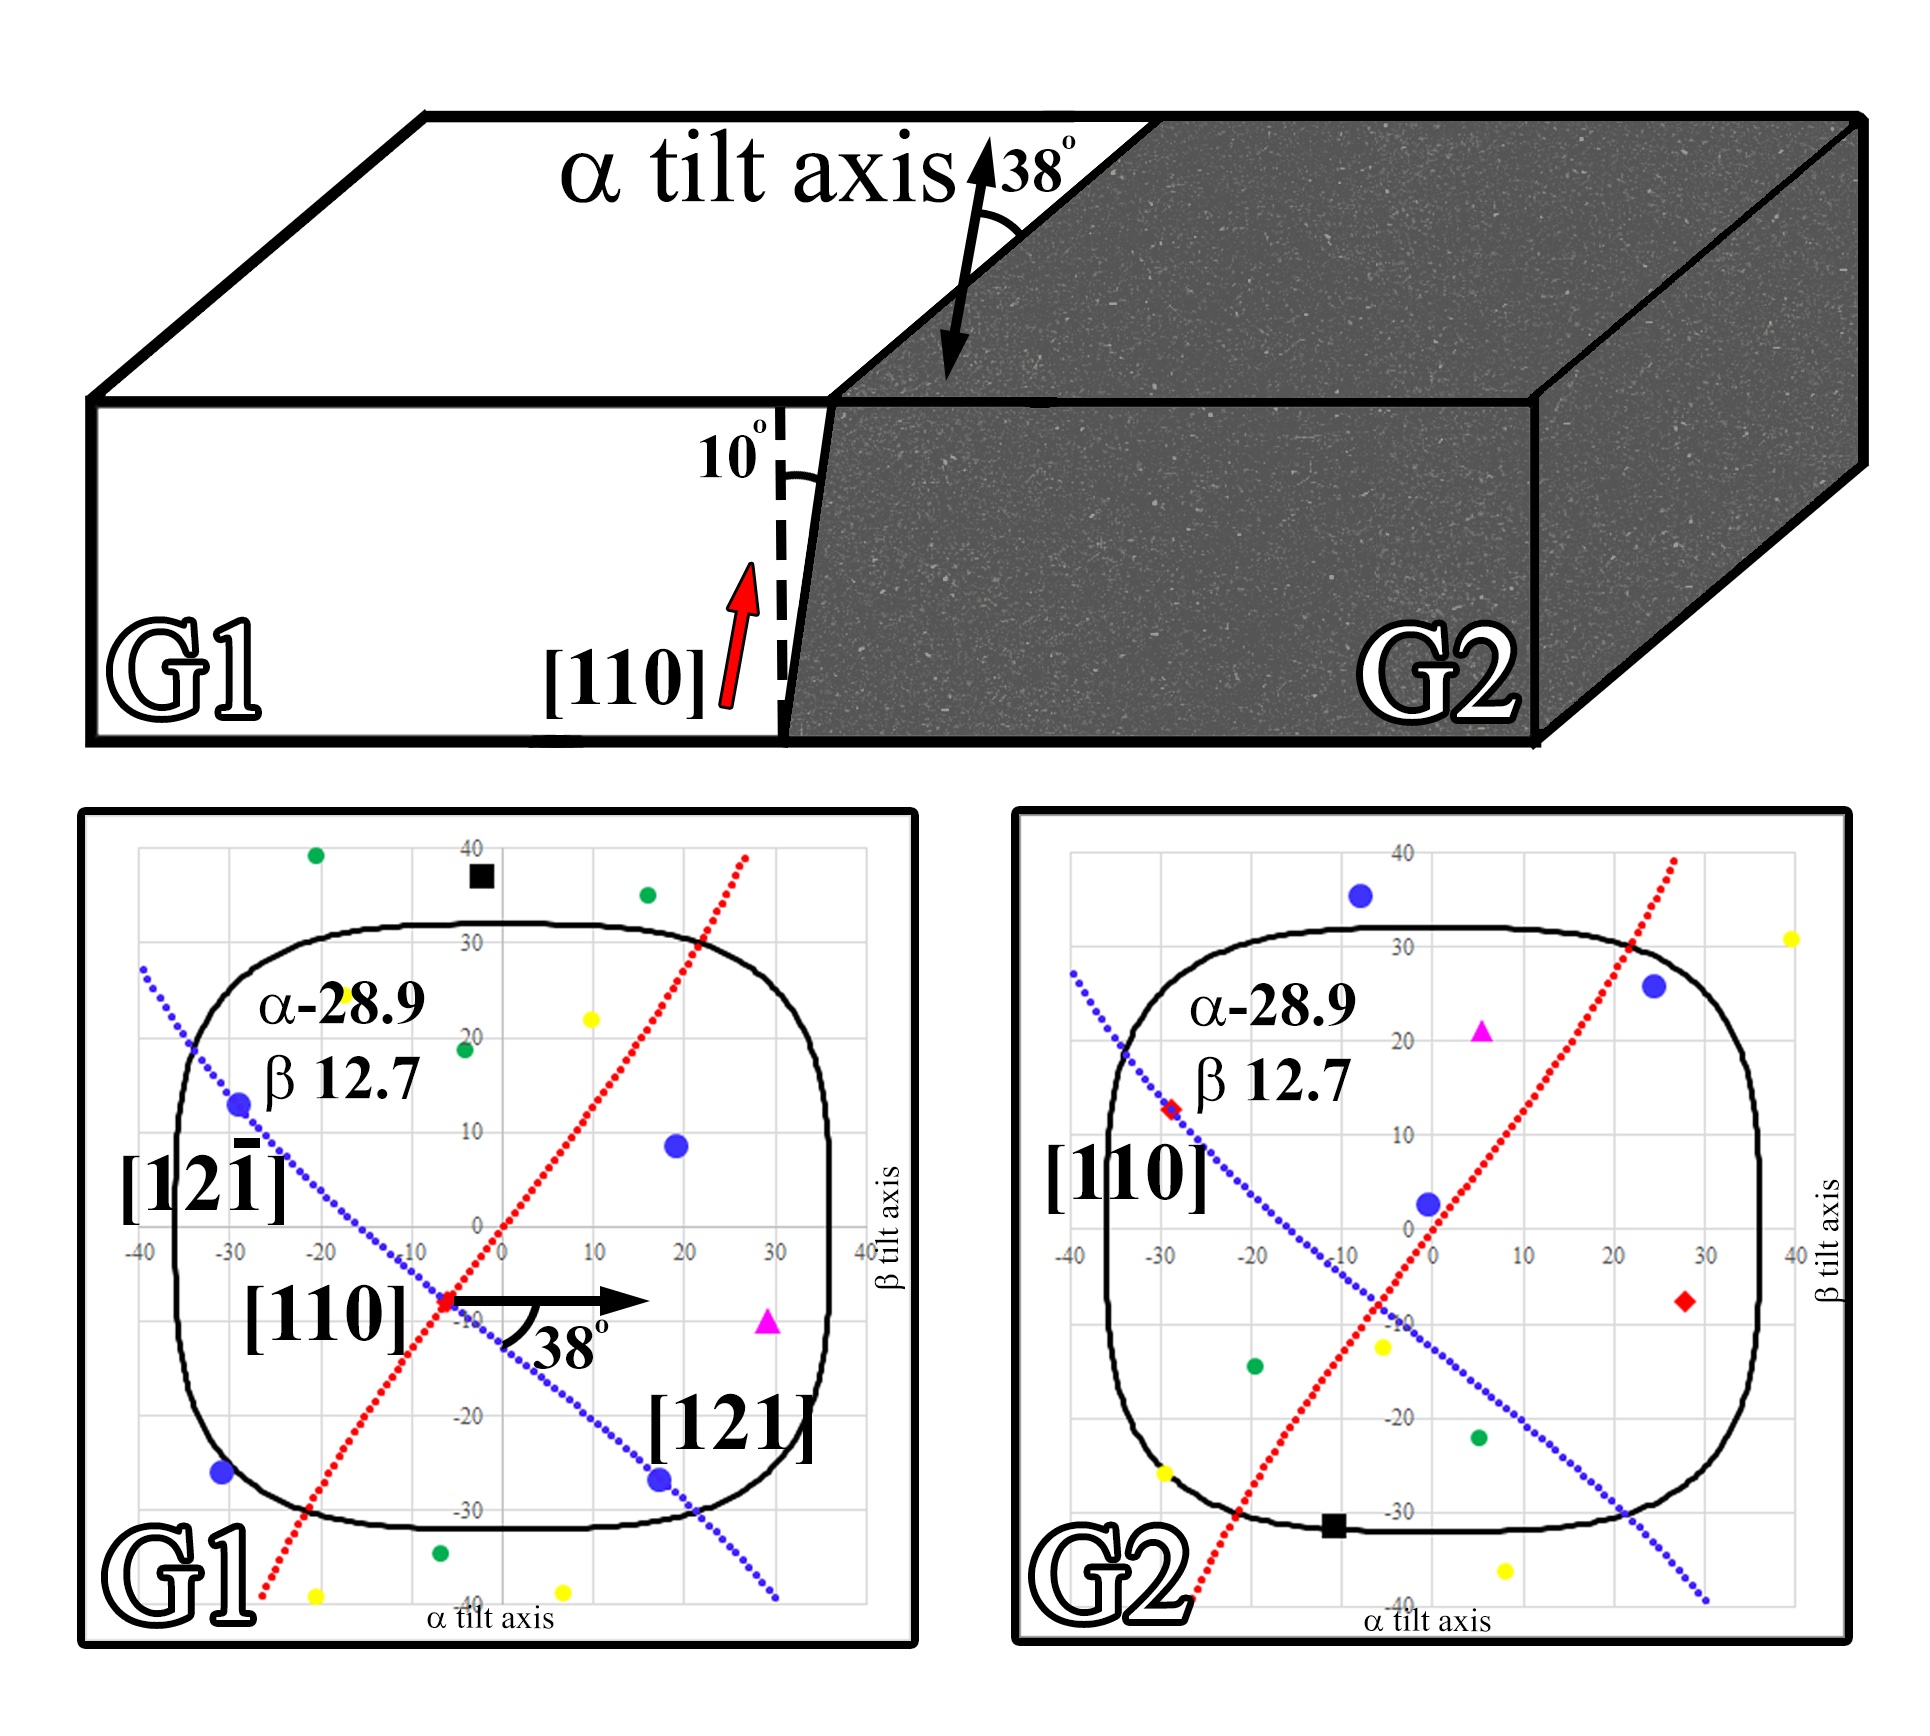 Schematics illustrating a protocol for determining the
grain boundary physical orientation relationship to the adjacent
crystalline grains. At α,β:0,0 the boundary is ~10° from an edge on
condition with the boundary oriented 38° from the α tilt axis. The
crystallographic solution for both grains is presented with an overlay
of the tilt orientations for tilting the boundary along (blue) and
against (red) the long axis of the boundary.